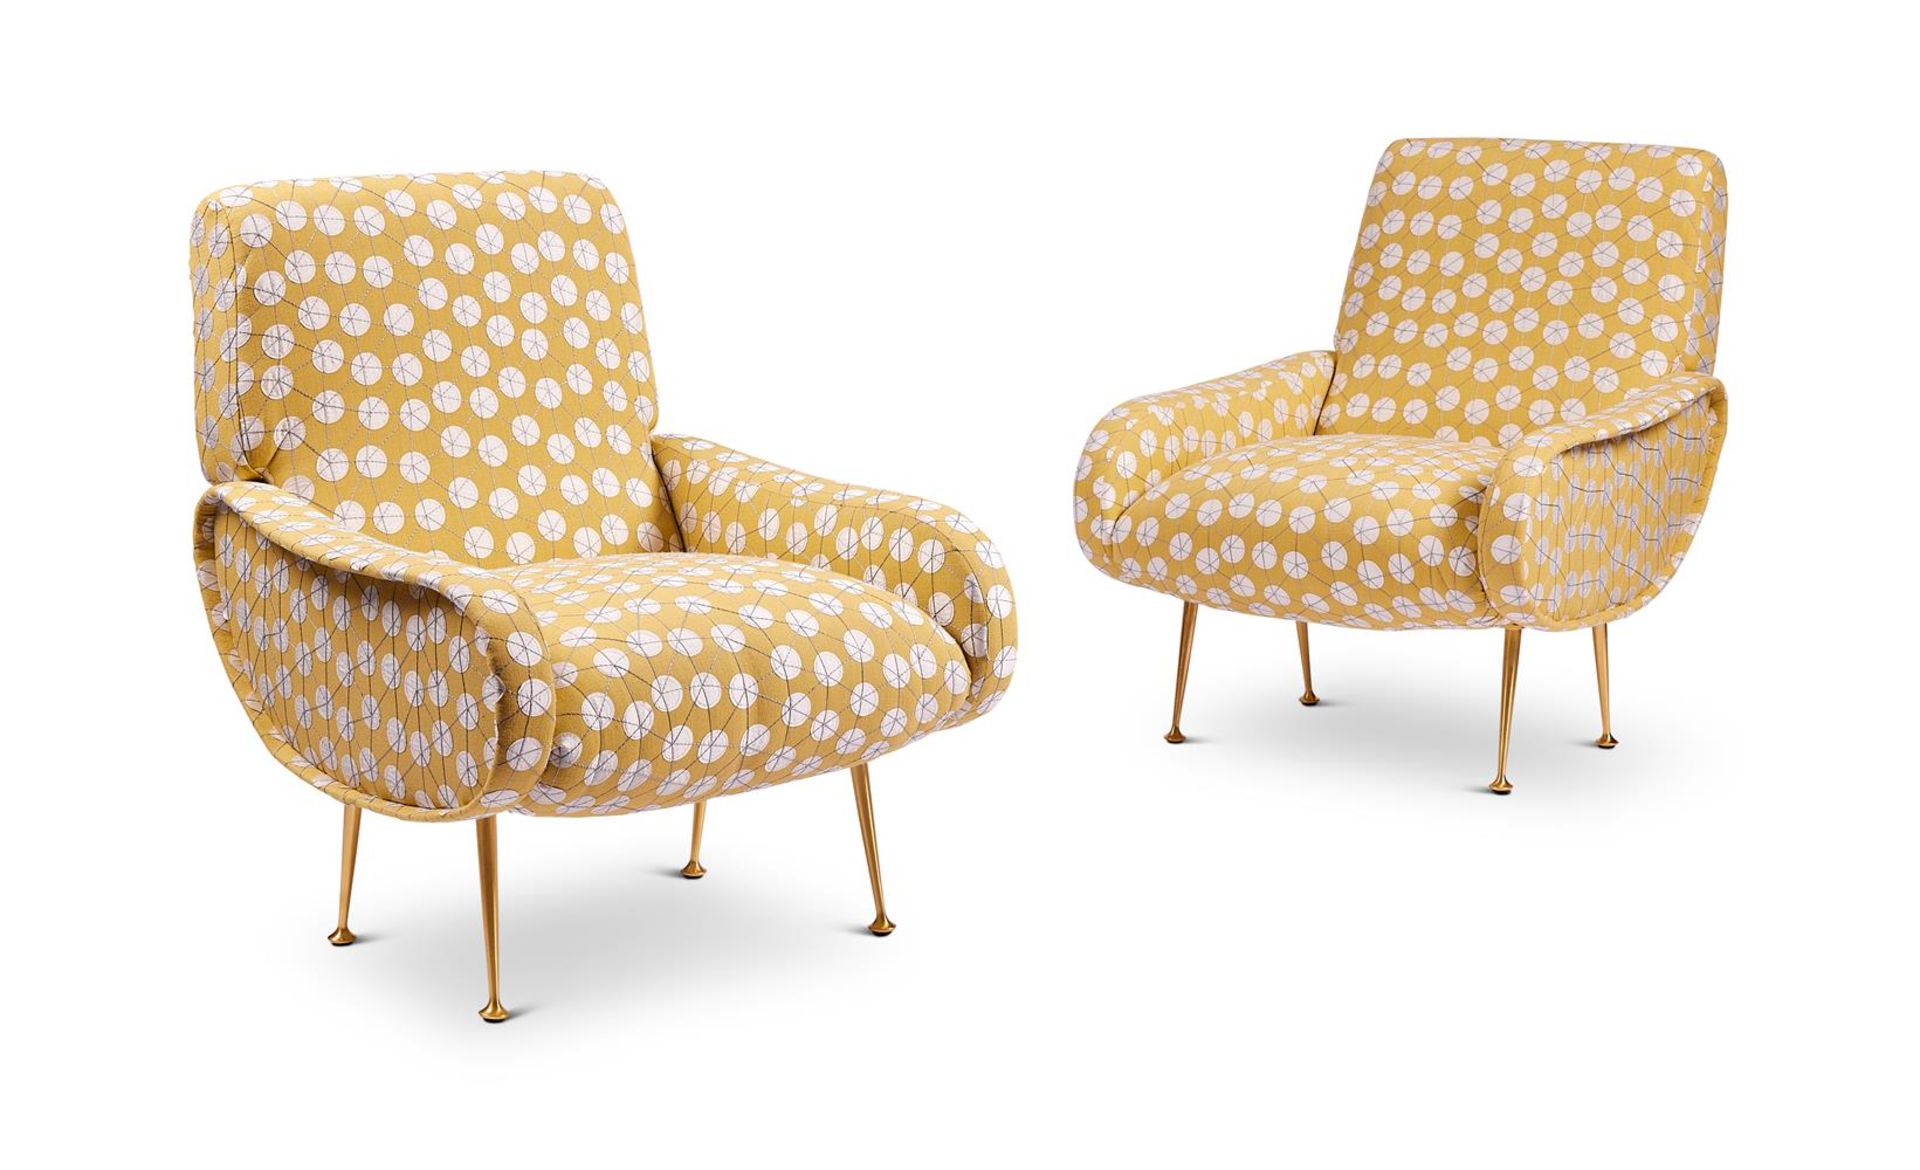 A PAIR OF BRASS AND UPHOLSTERED ARMCHAIRS DESIGNED BY MARCO ZANUSO (1916-2001) FOR ARFLEX